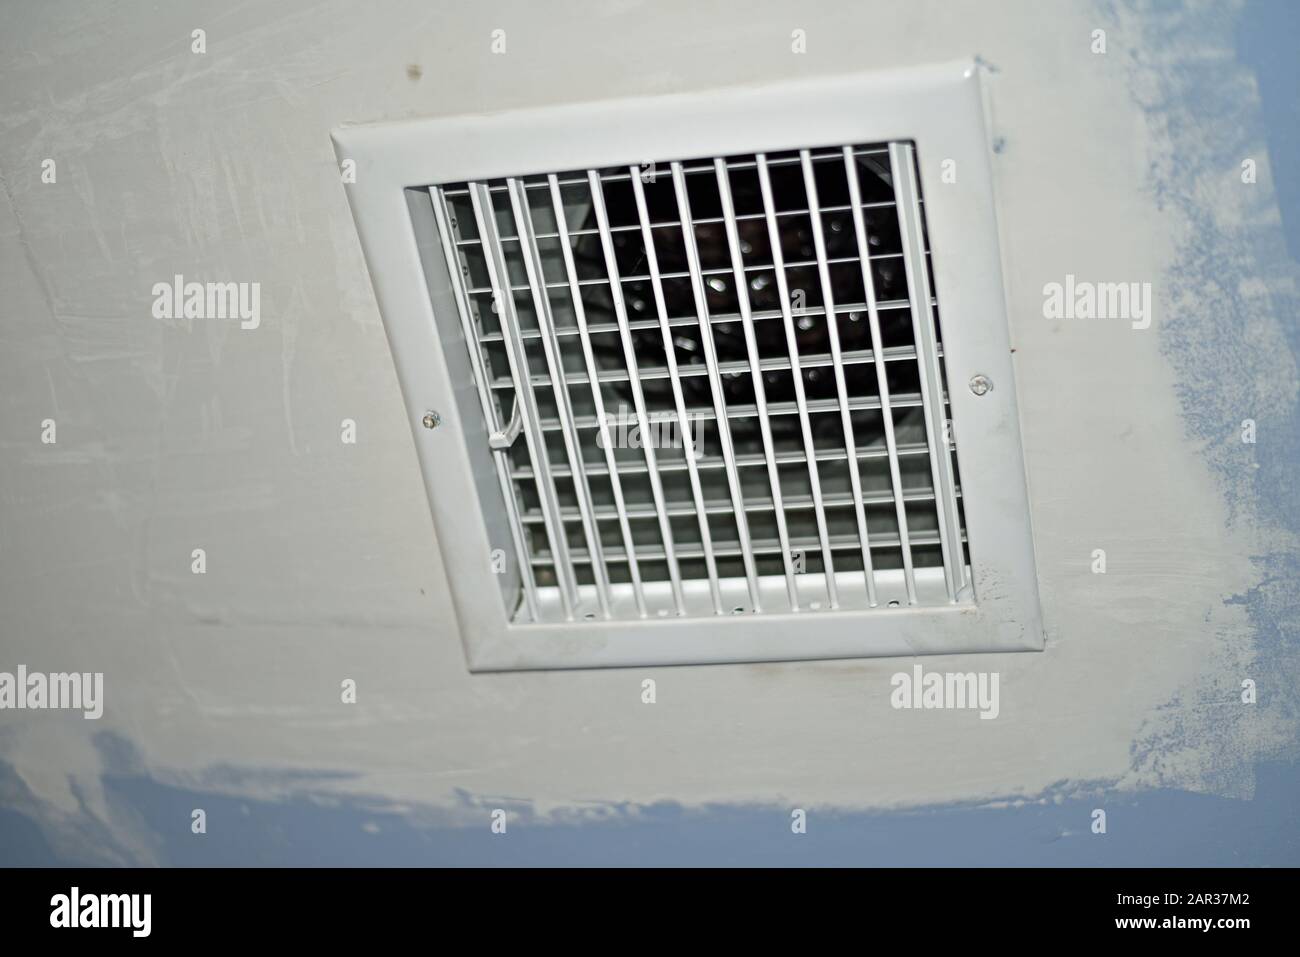 Hvac Vent In Ceiling Stock Photo 341205986 Alamy